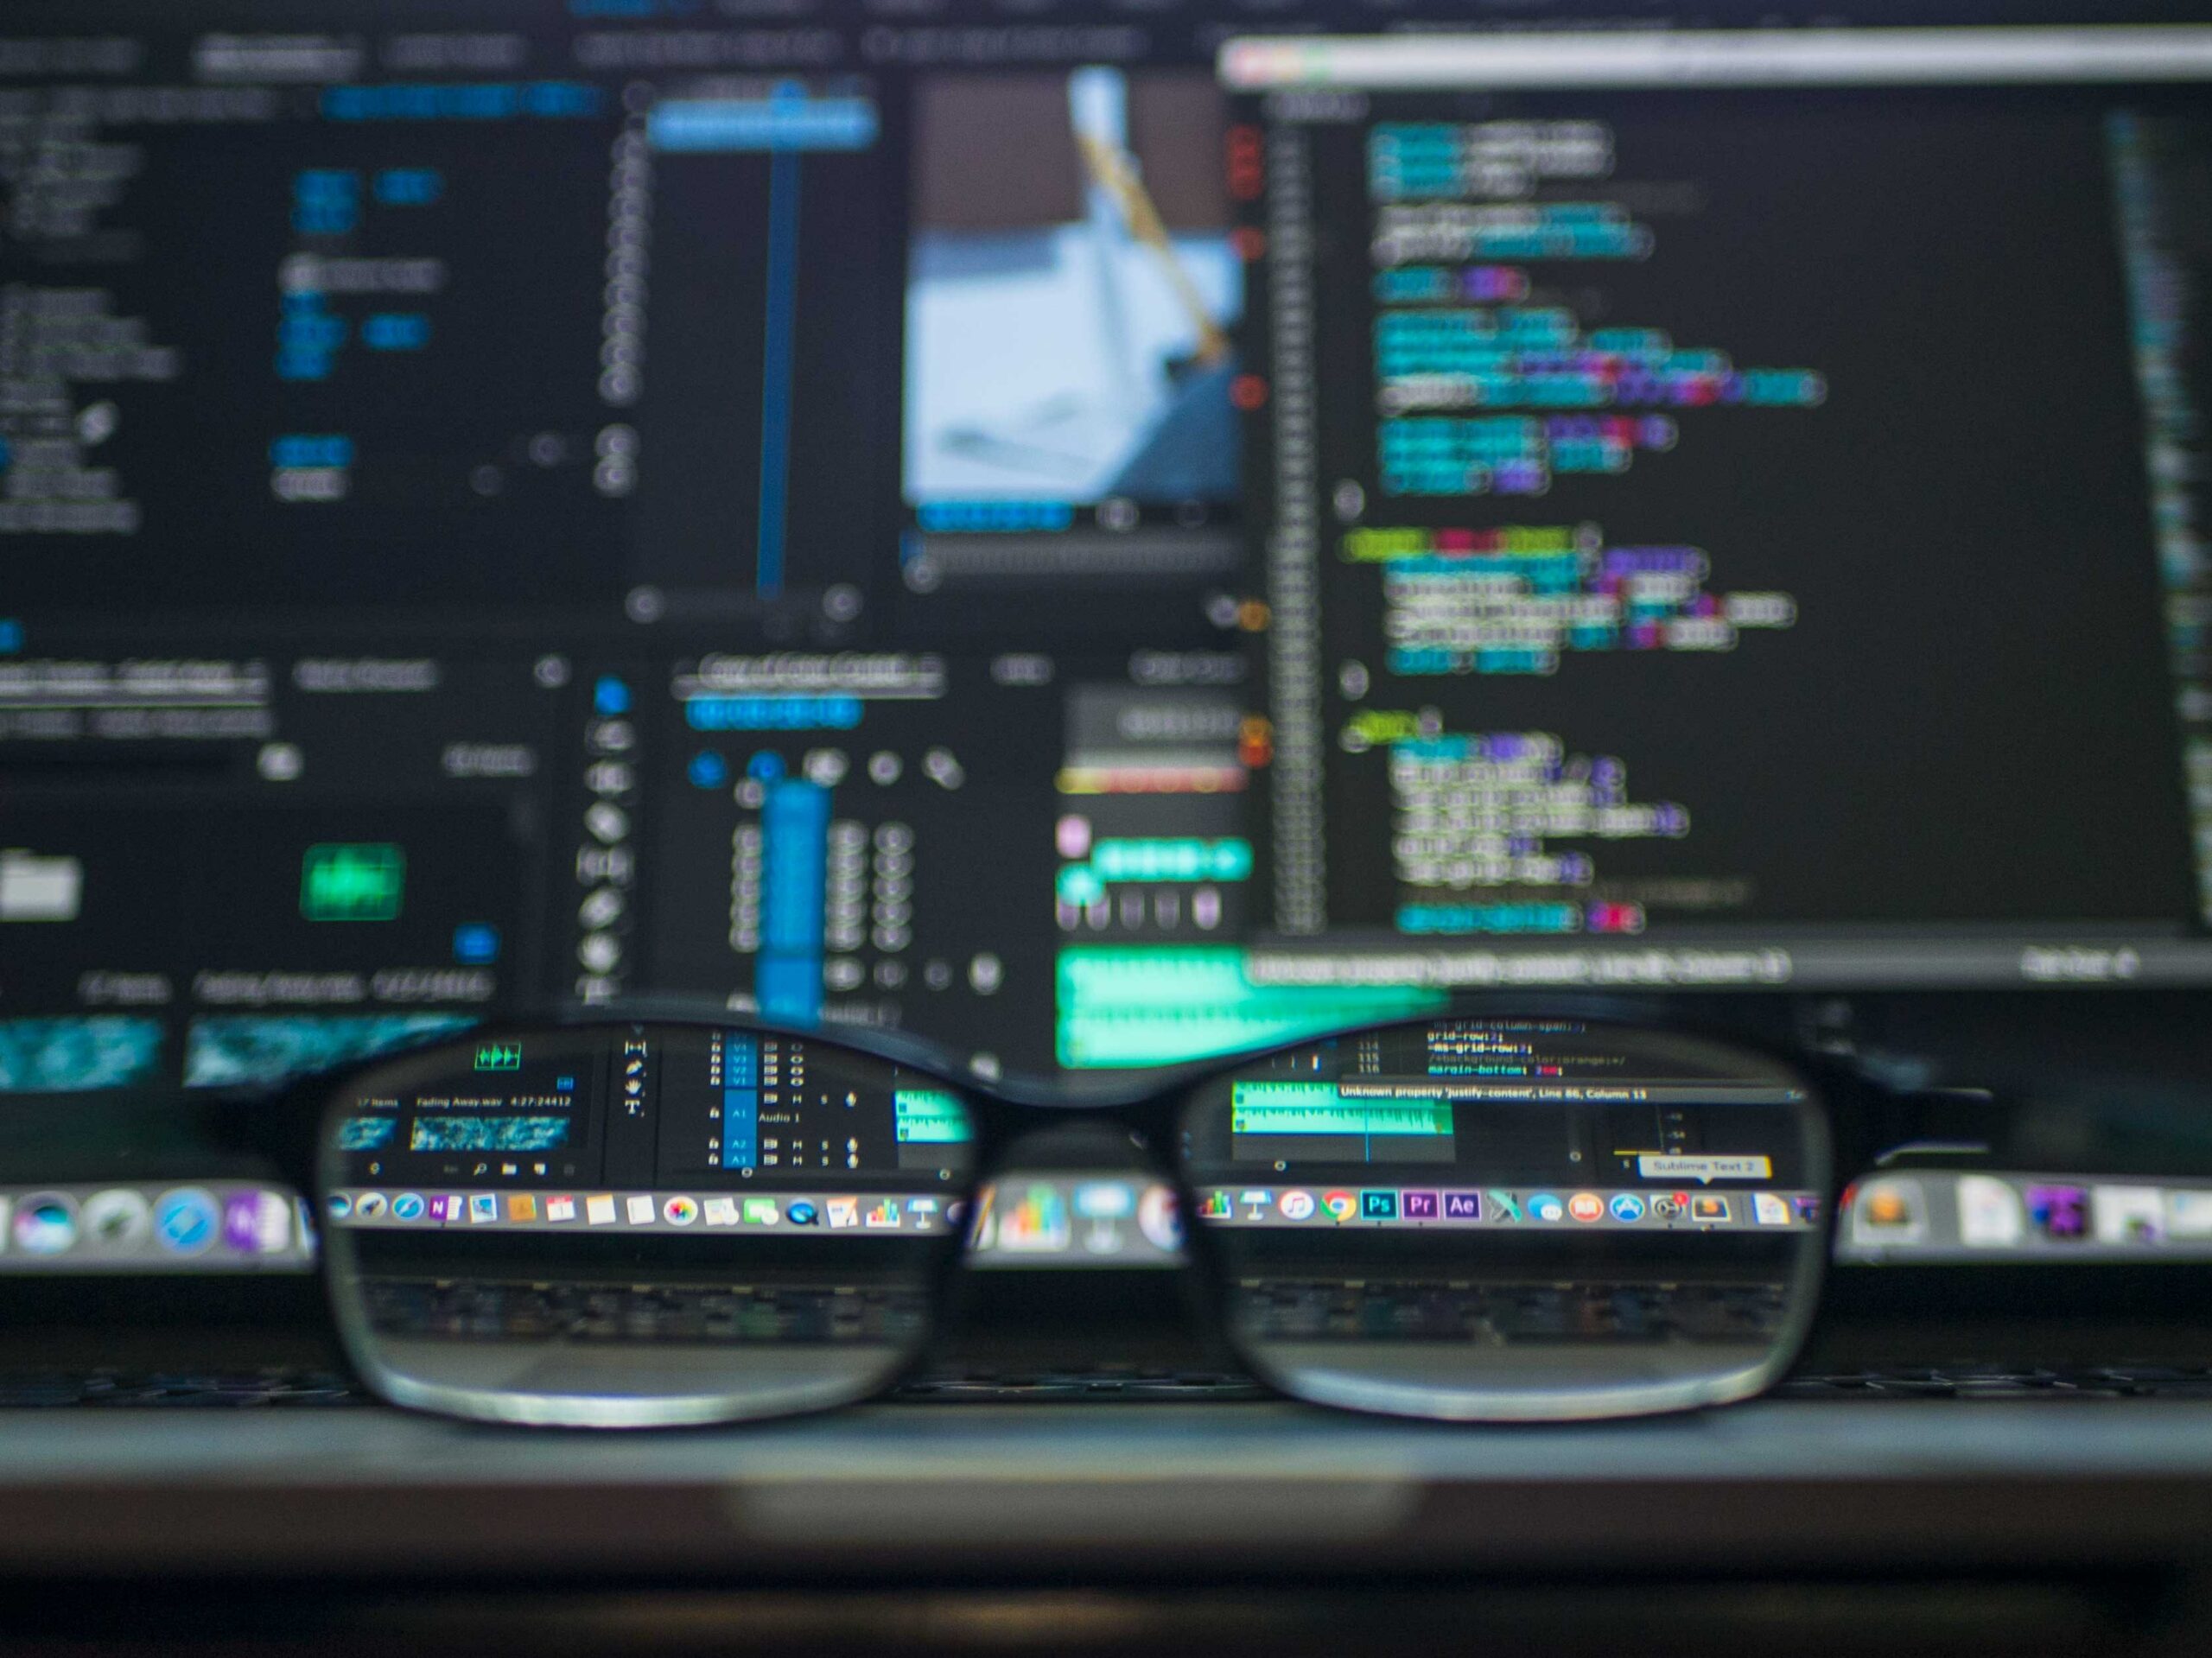 Pair of glasses on desk in front of digital screens showing data